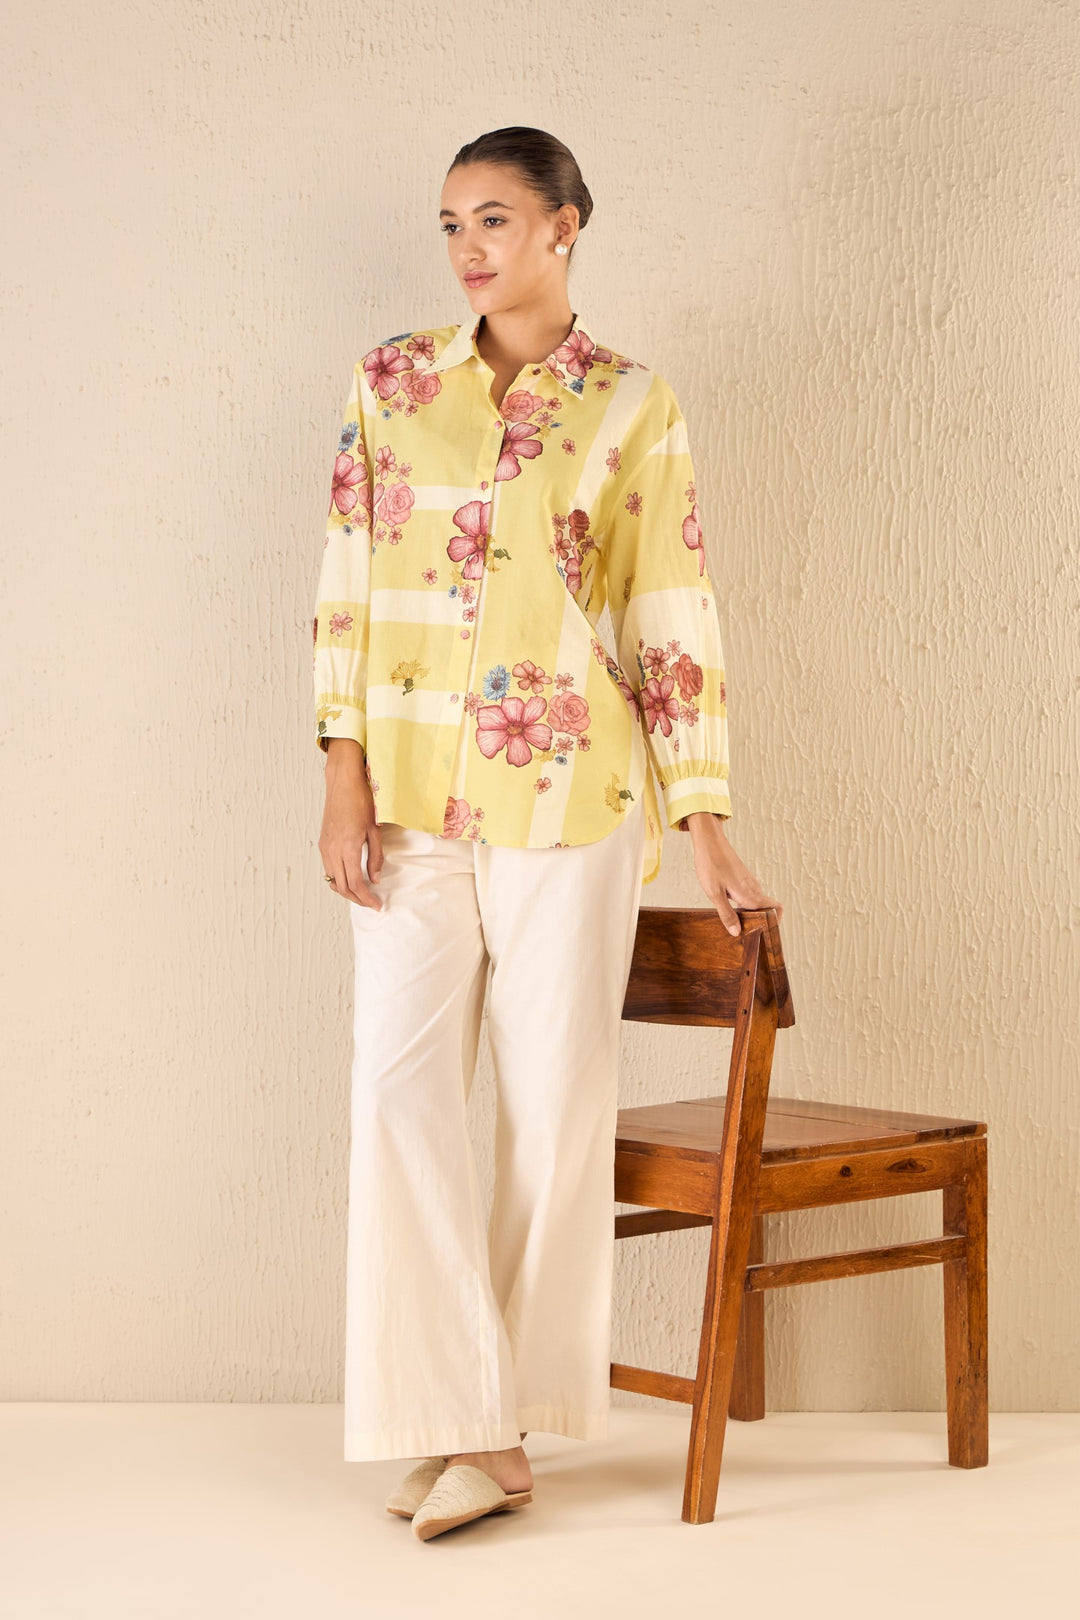 FLORAL FUSION: YELLOW & WHITE STRIPE FLORAL SHIRT WITH IVORY FLAIR PANTS